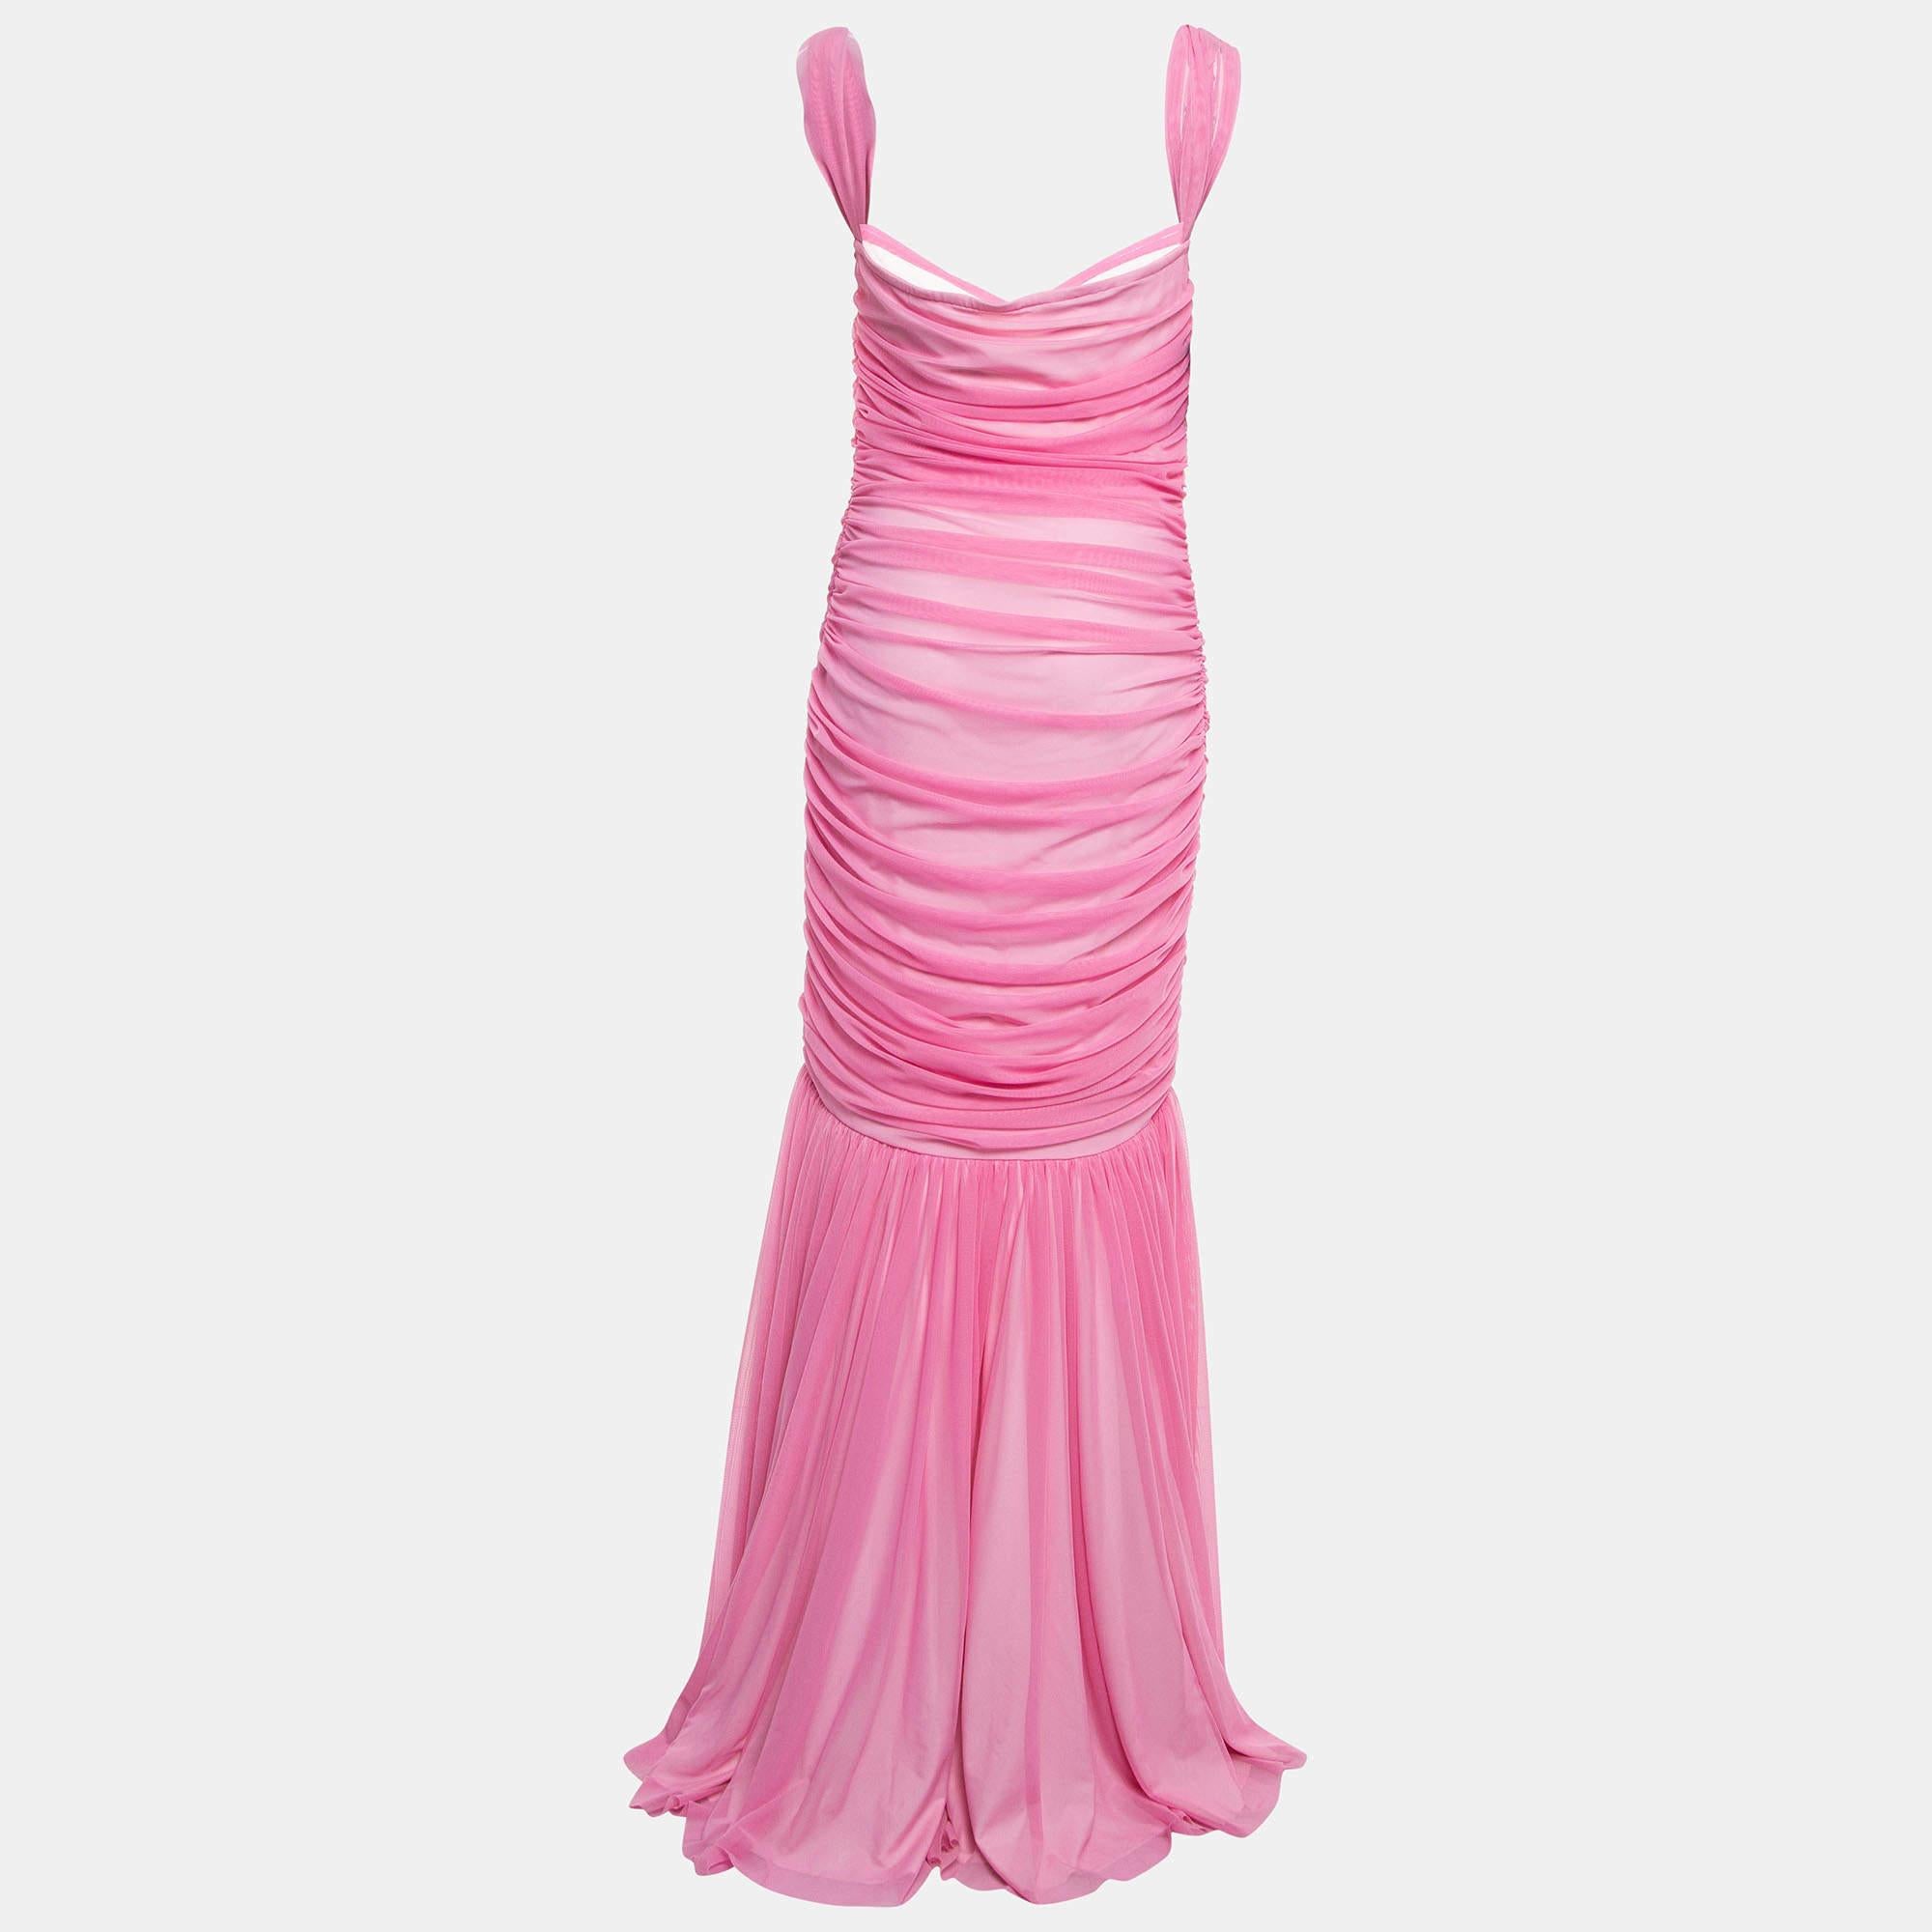 Resplendent, elegant, and gorgeous, this pink fishtail gown is a fabulous choice. It is beautified using stunning details and a stylish neckline. Wear it with statement accessories and a defining clutch.

